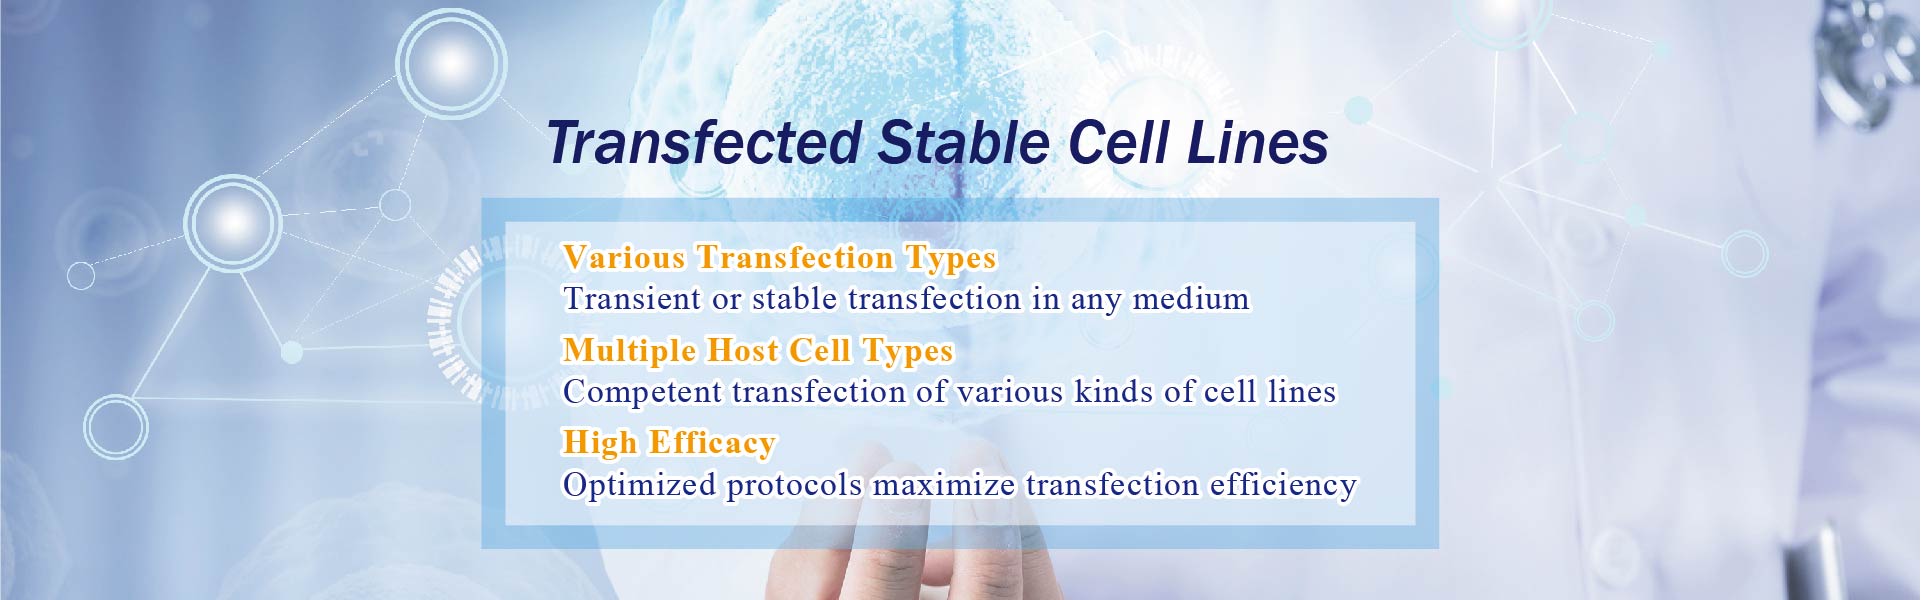 transfected_stable_cell_lines.jpg